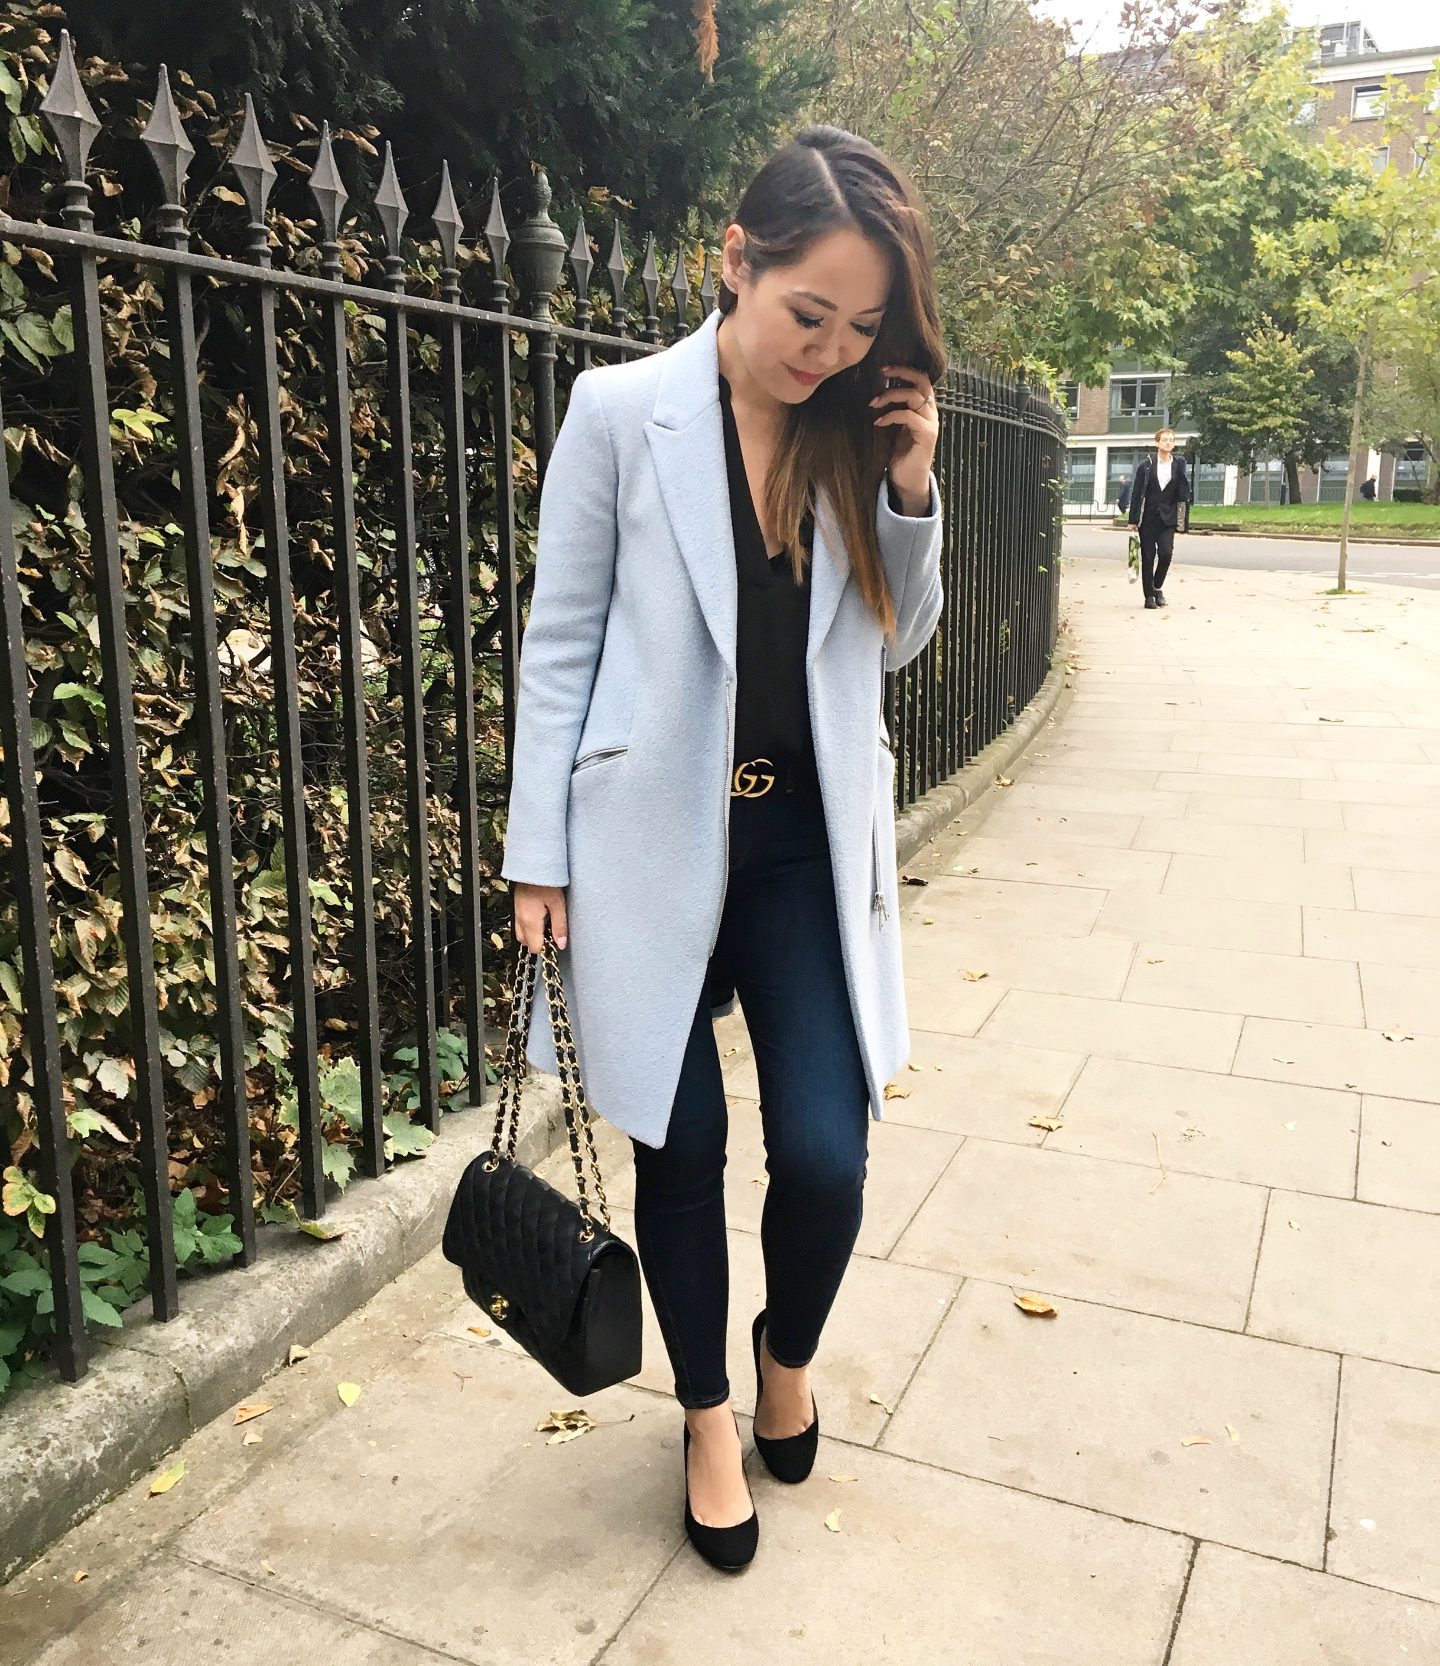 Outfit Diary Round-Up! - Chase Amie